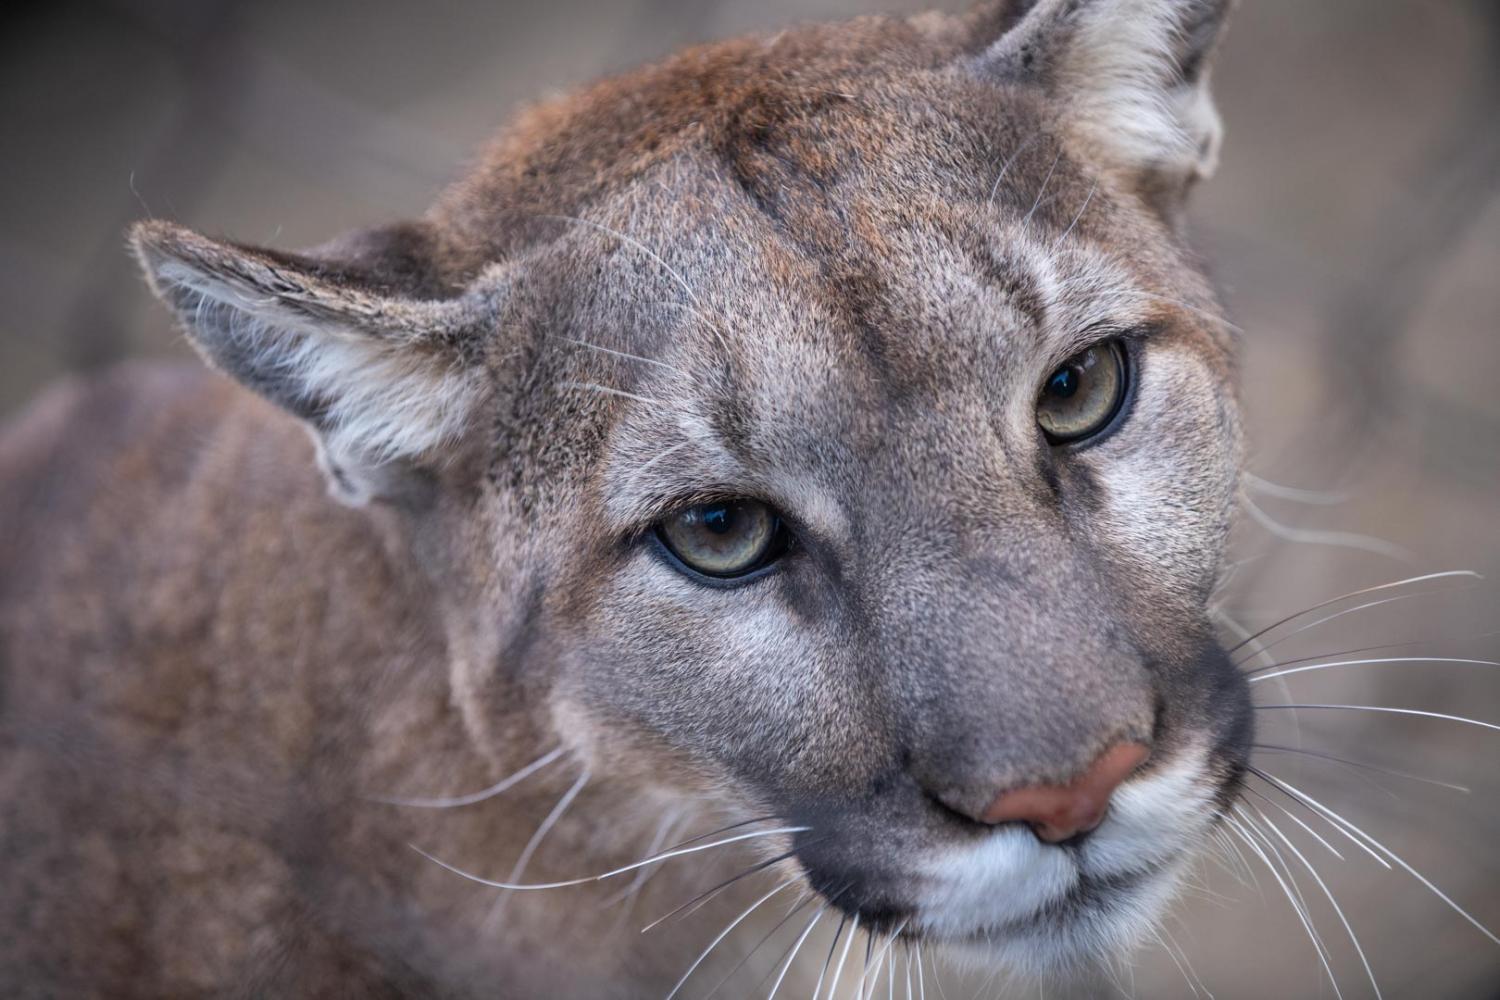 Image of cougar face